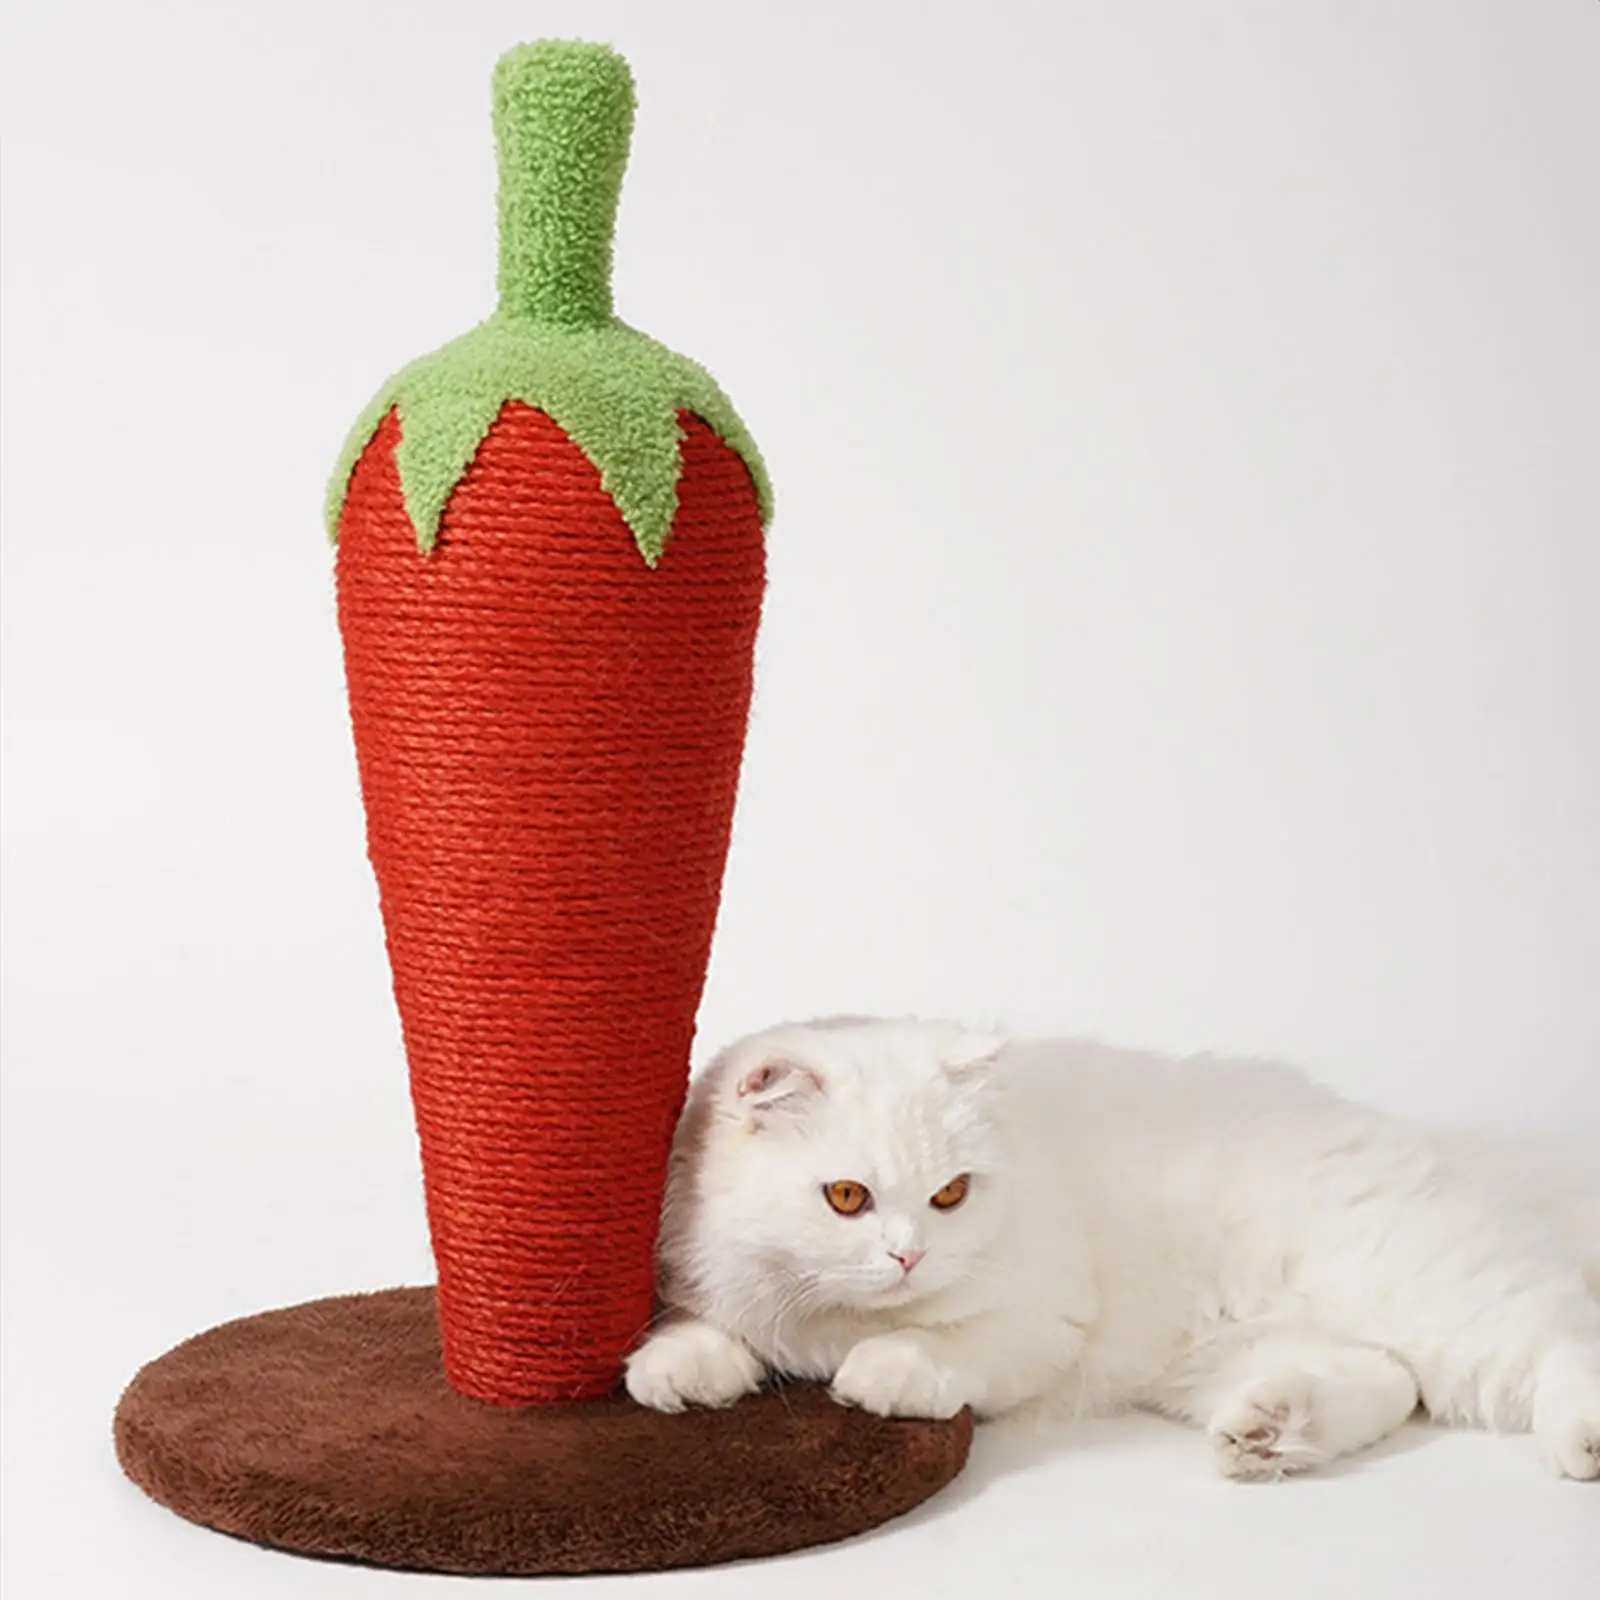 Scratcher Pad Protect Cats Nails Grind Claws Cat Scratching Post for Kitten